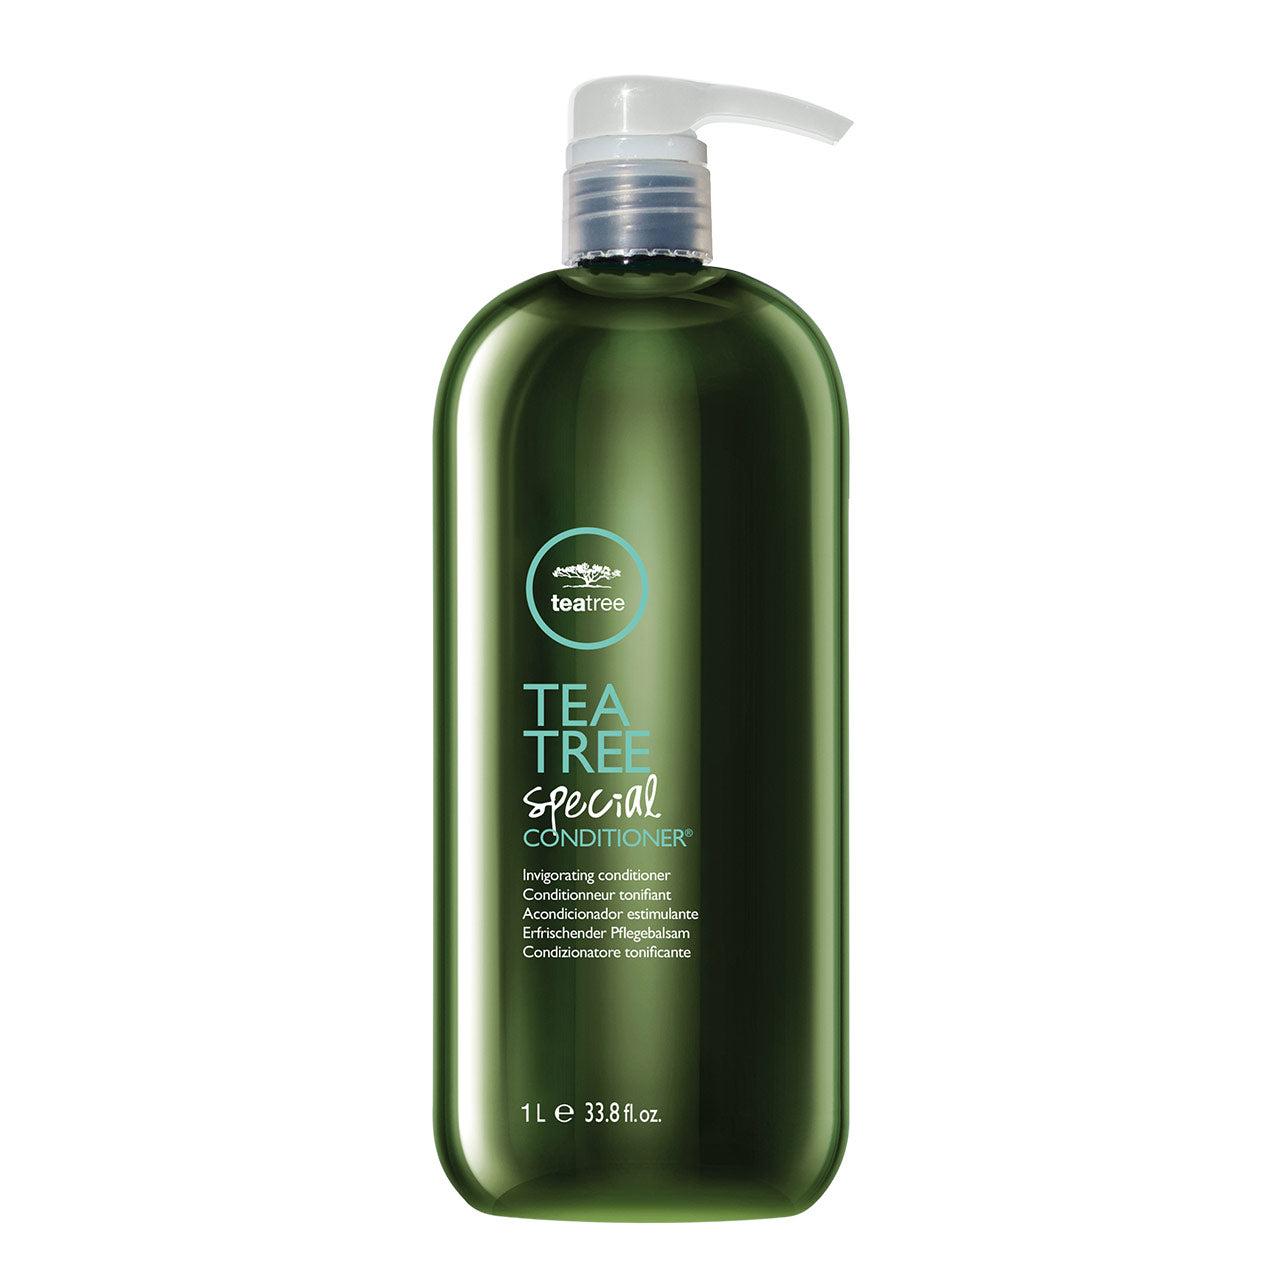 Tea Tree Special Conditioner - 1L - by Paul Mitchell |ProCare Outlet|